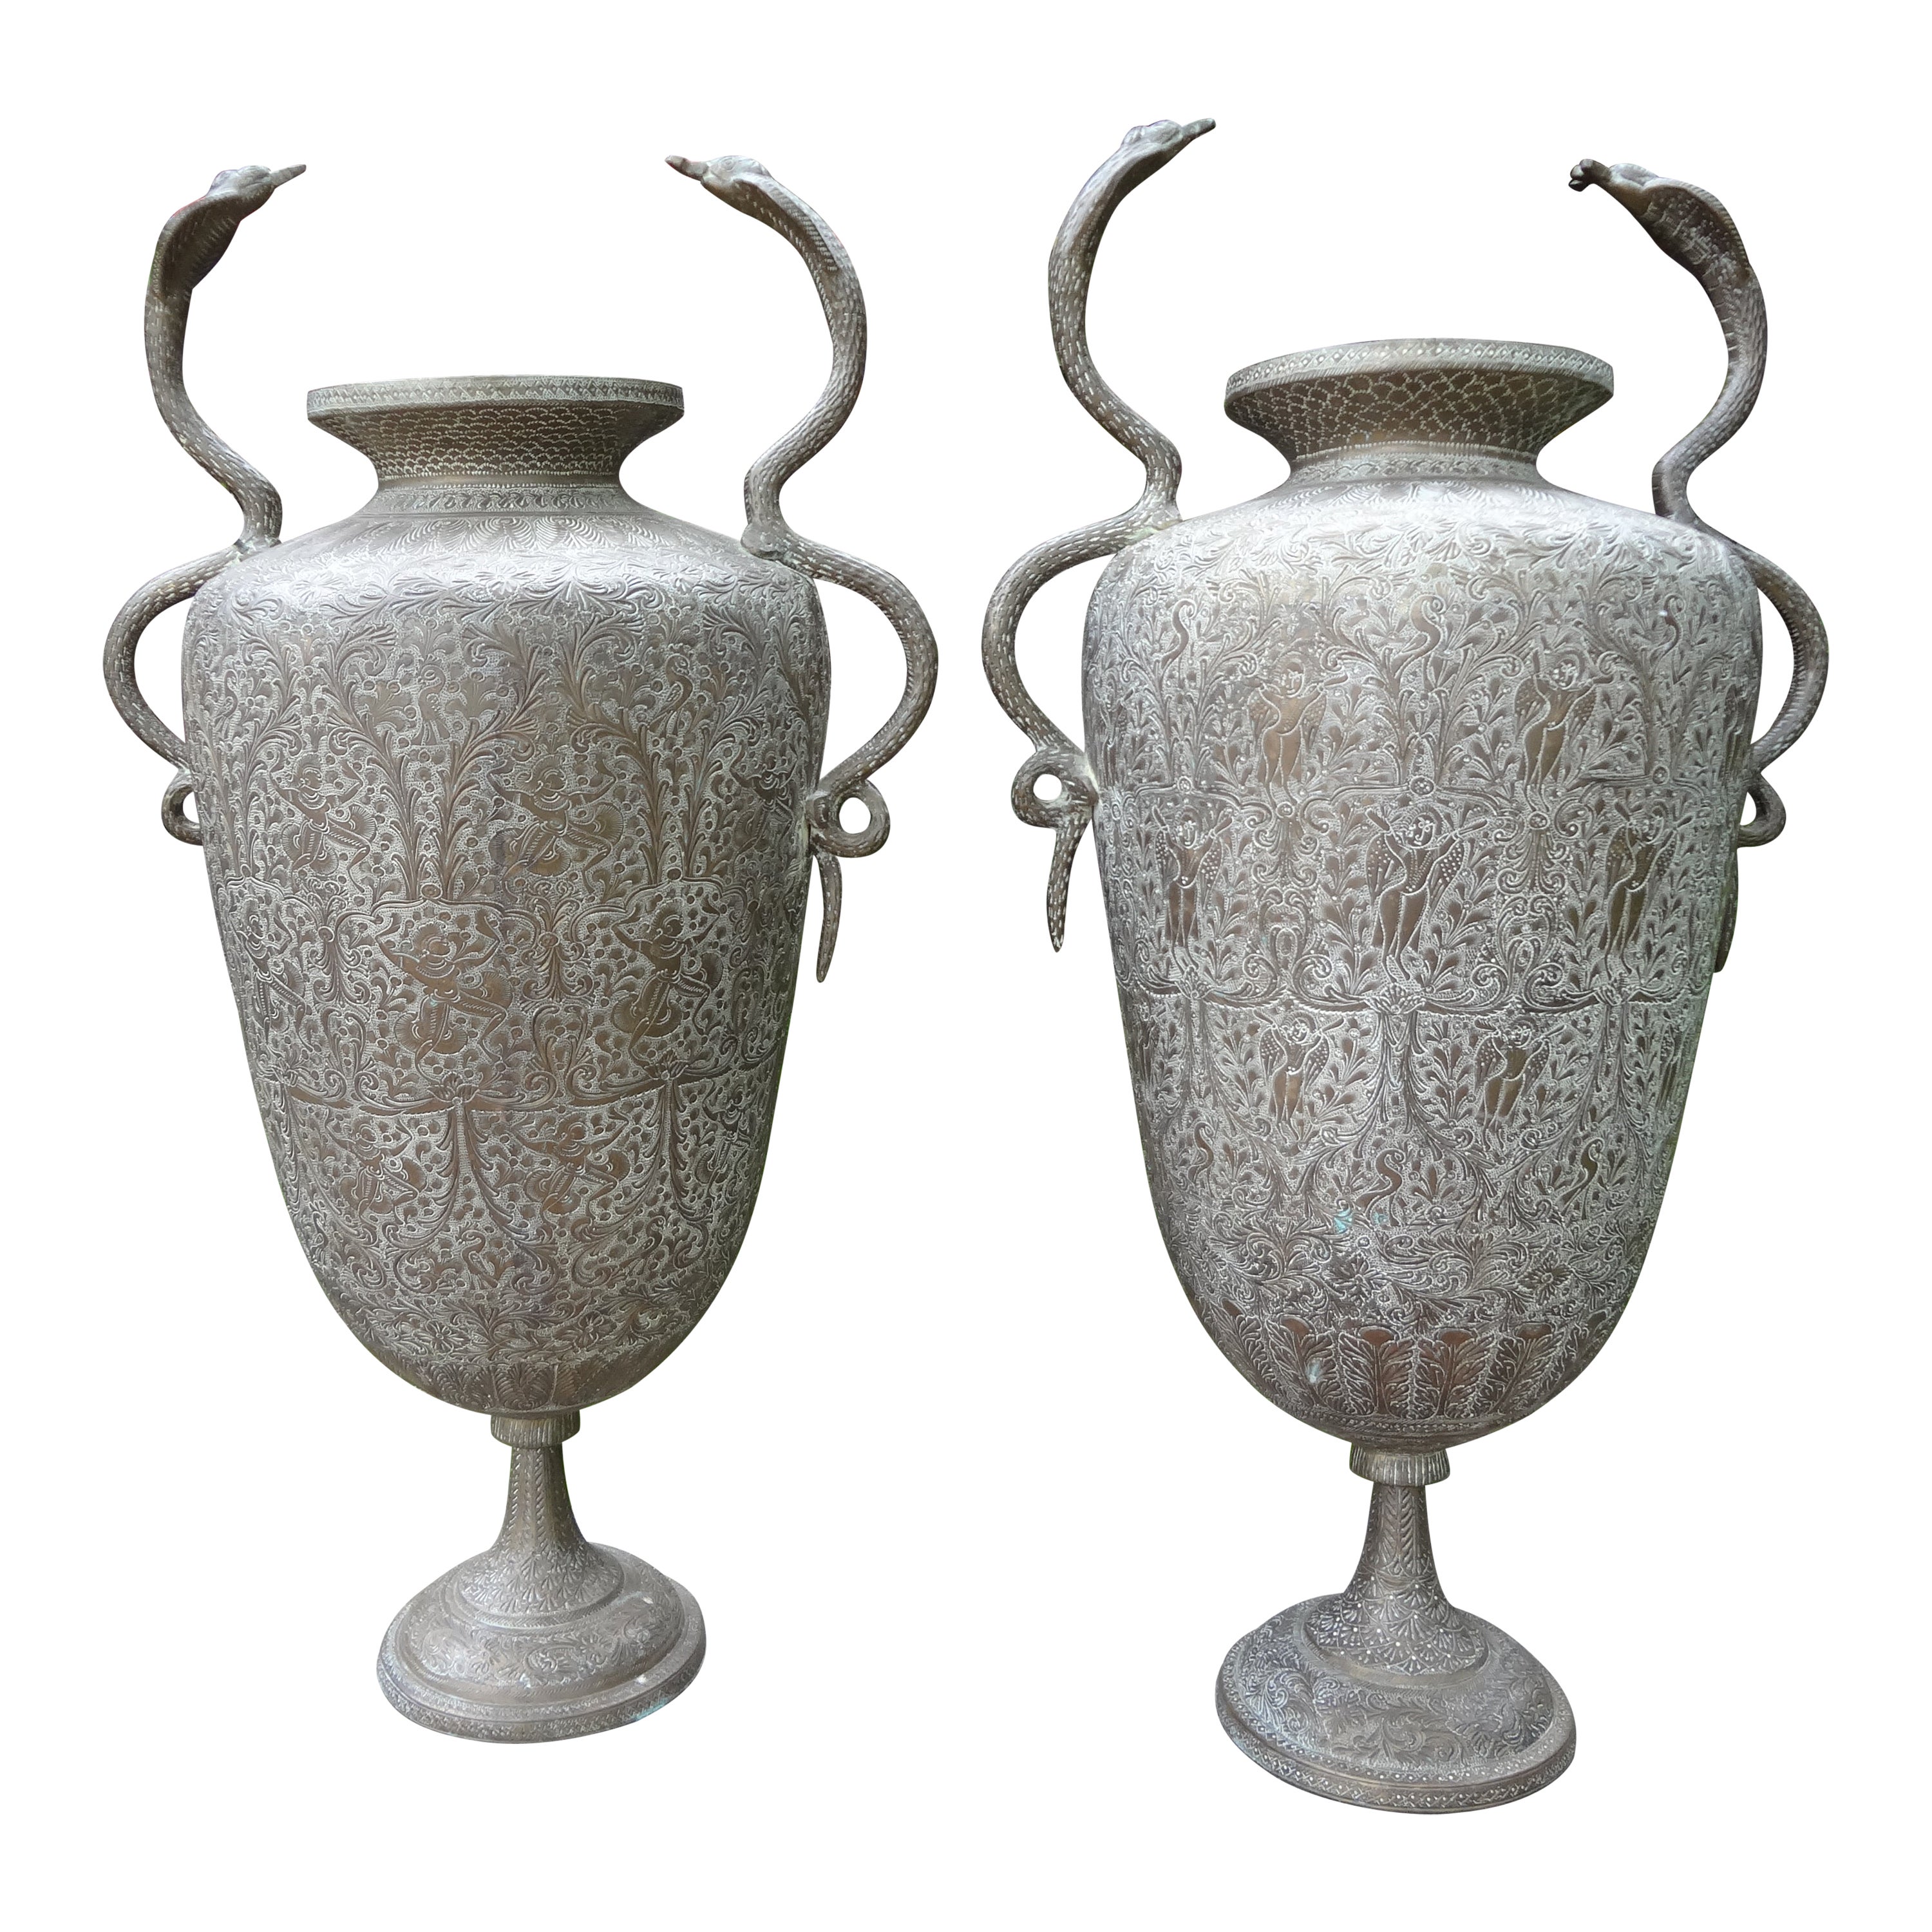 Pair Of Anglo-Indian Brass Urns With Cobras